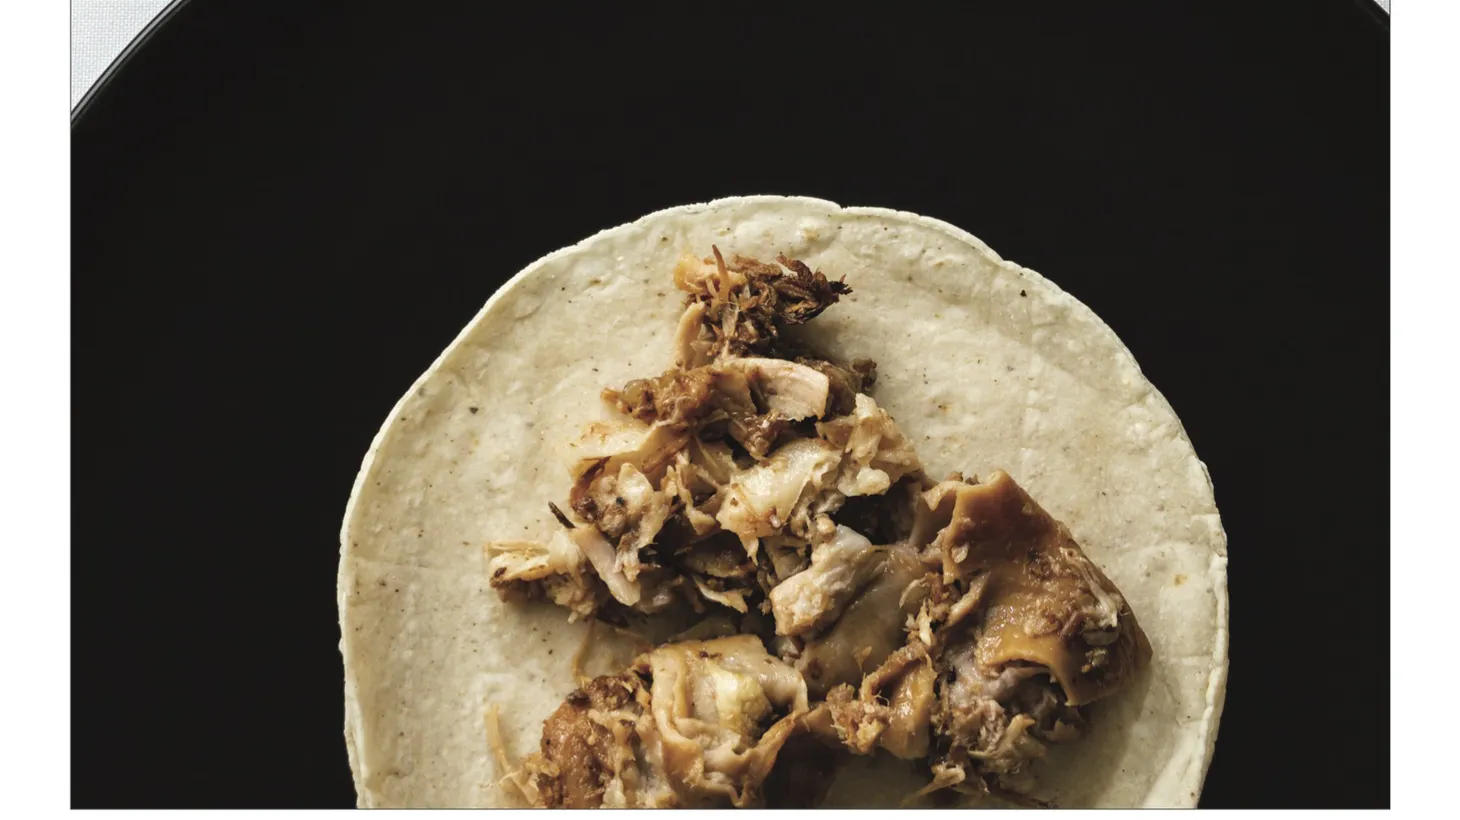 Food writer Vanessa Cecena explains that carnitas are a dish that many have experienced but few think they can make at home.